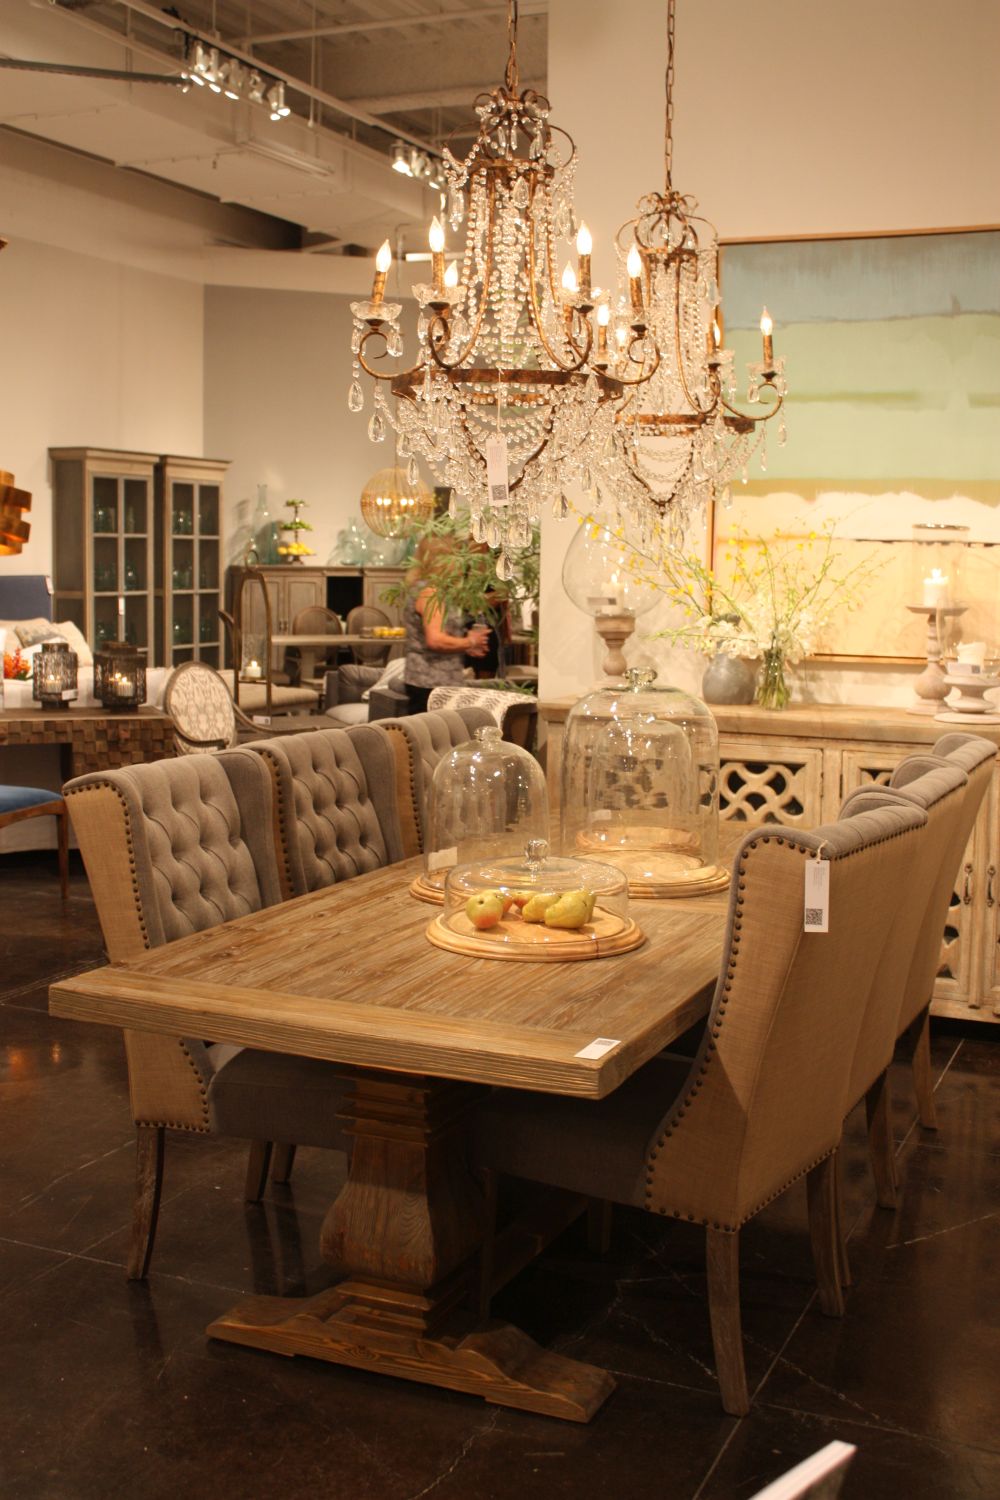 Large chandelier over dining table